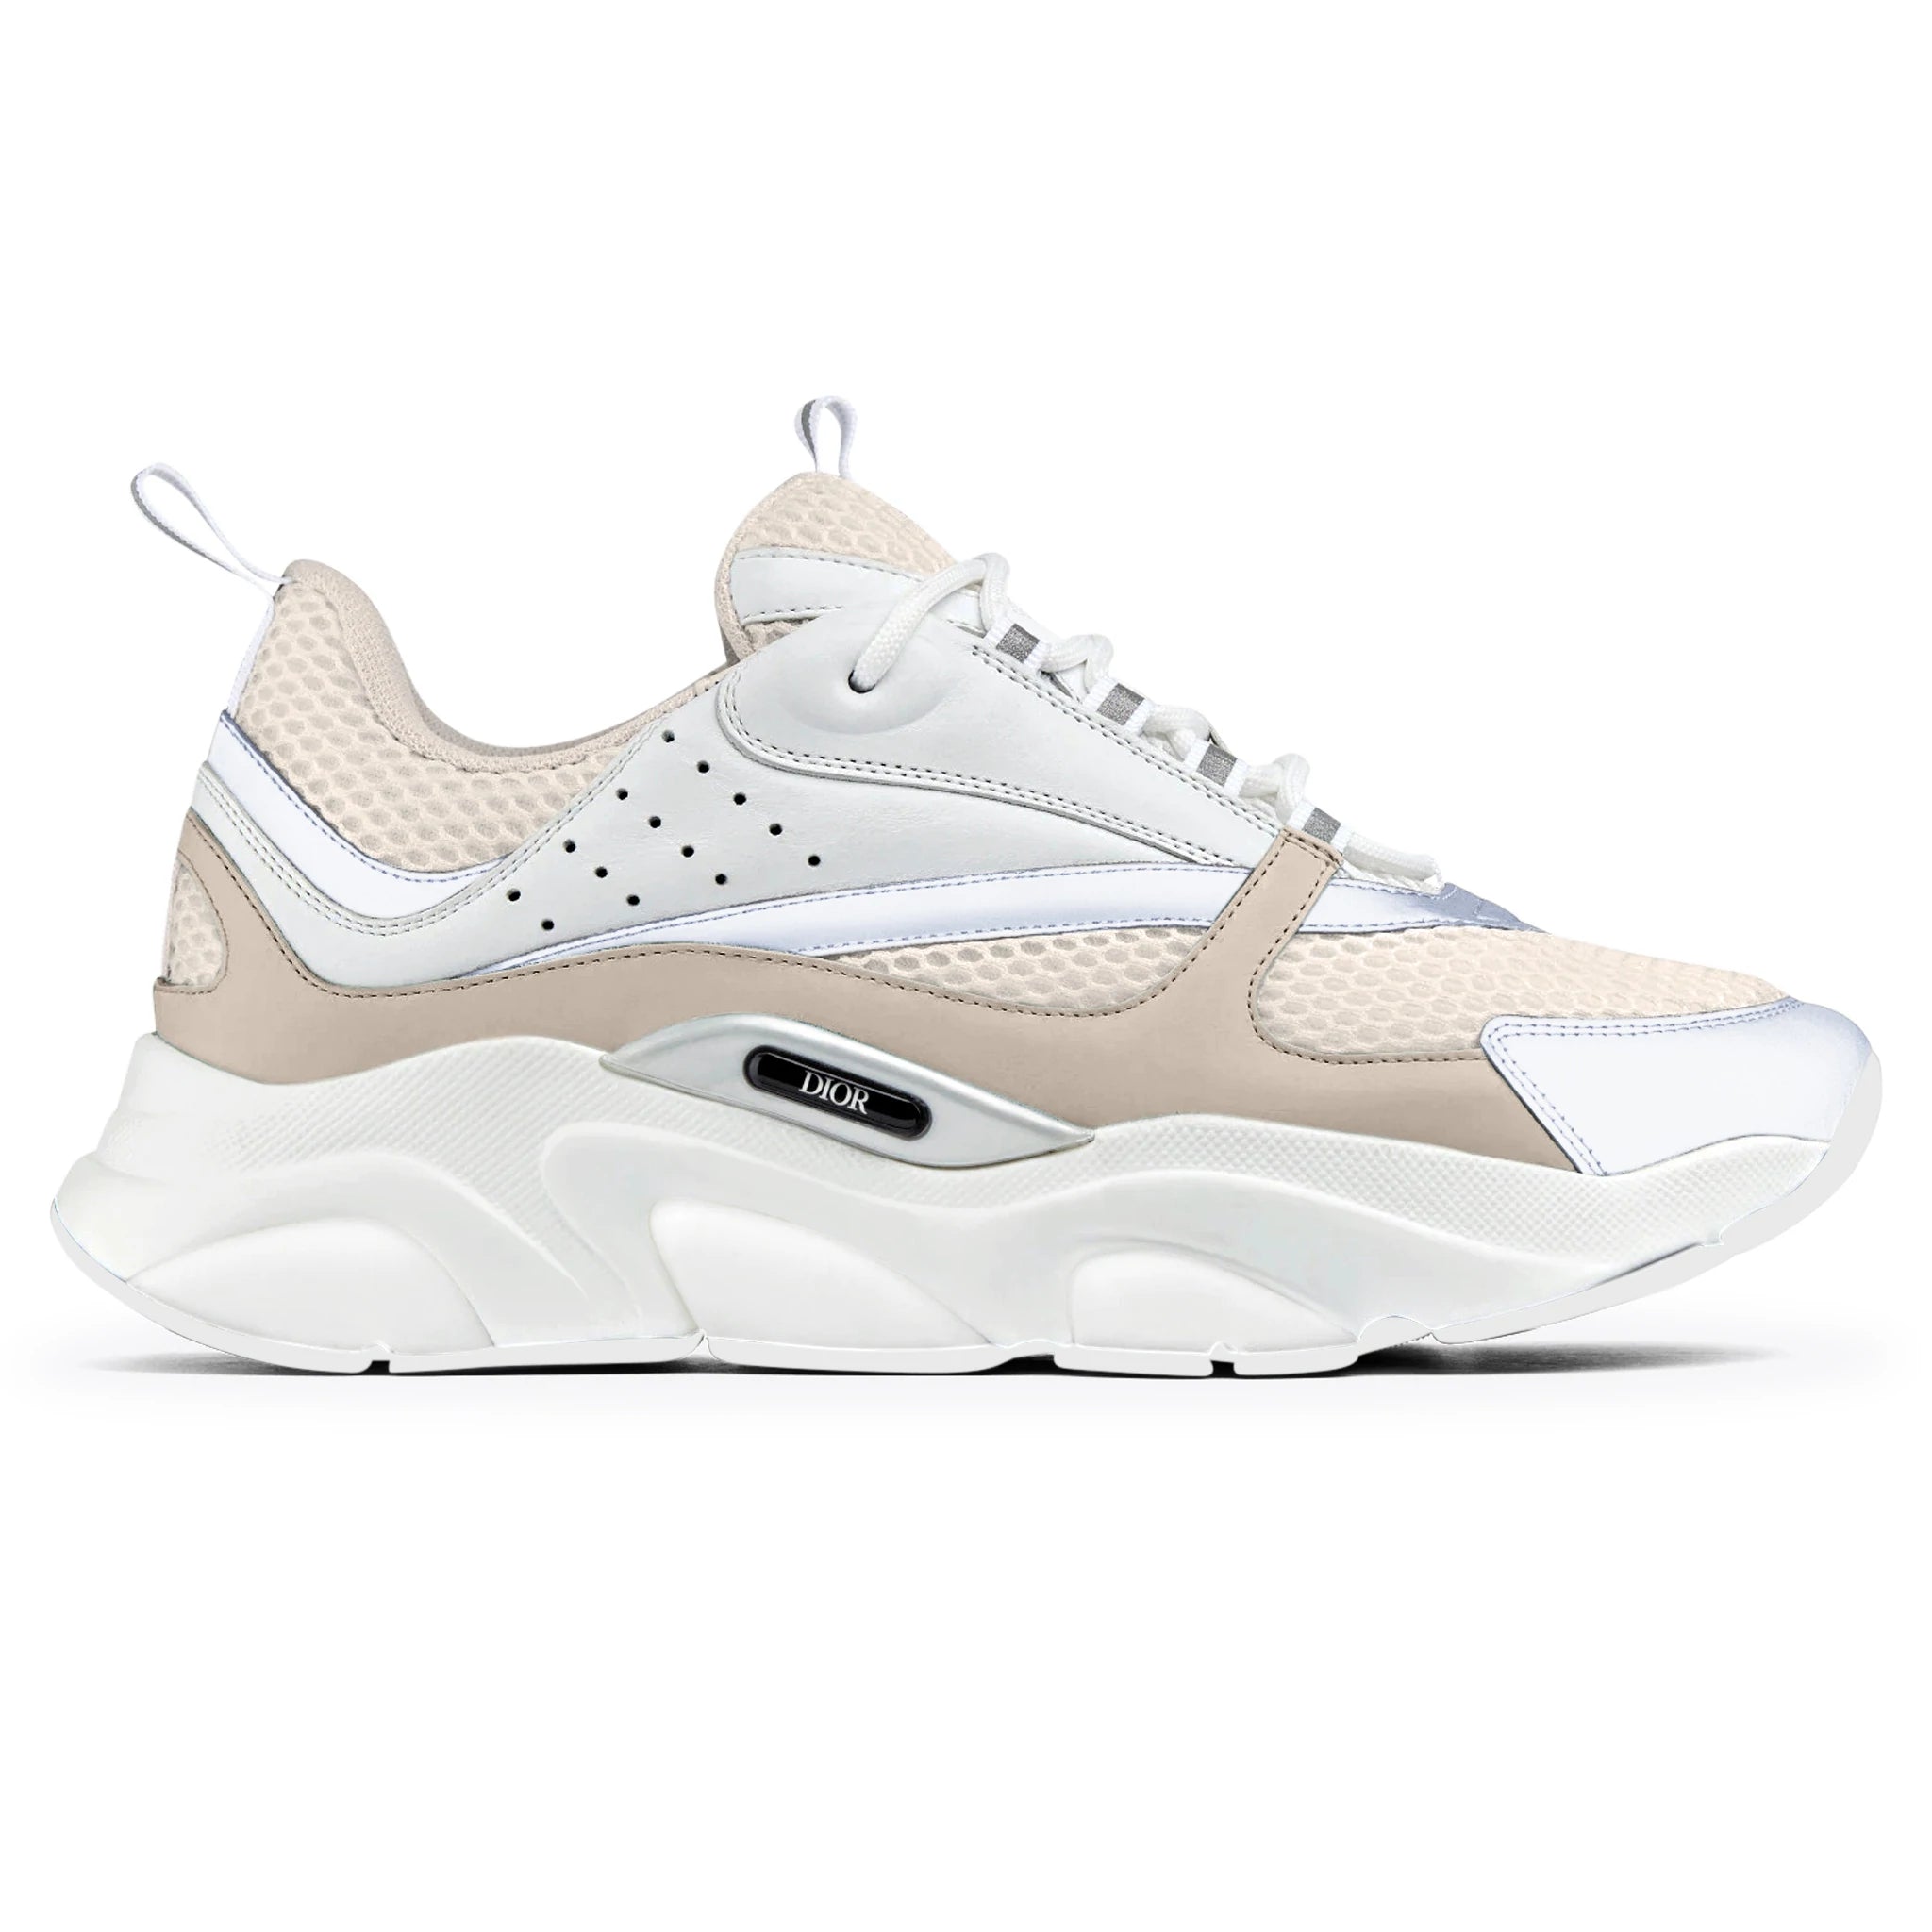 Dior B22 Sneaker Cream And White Technical Mesh With Olive